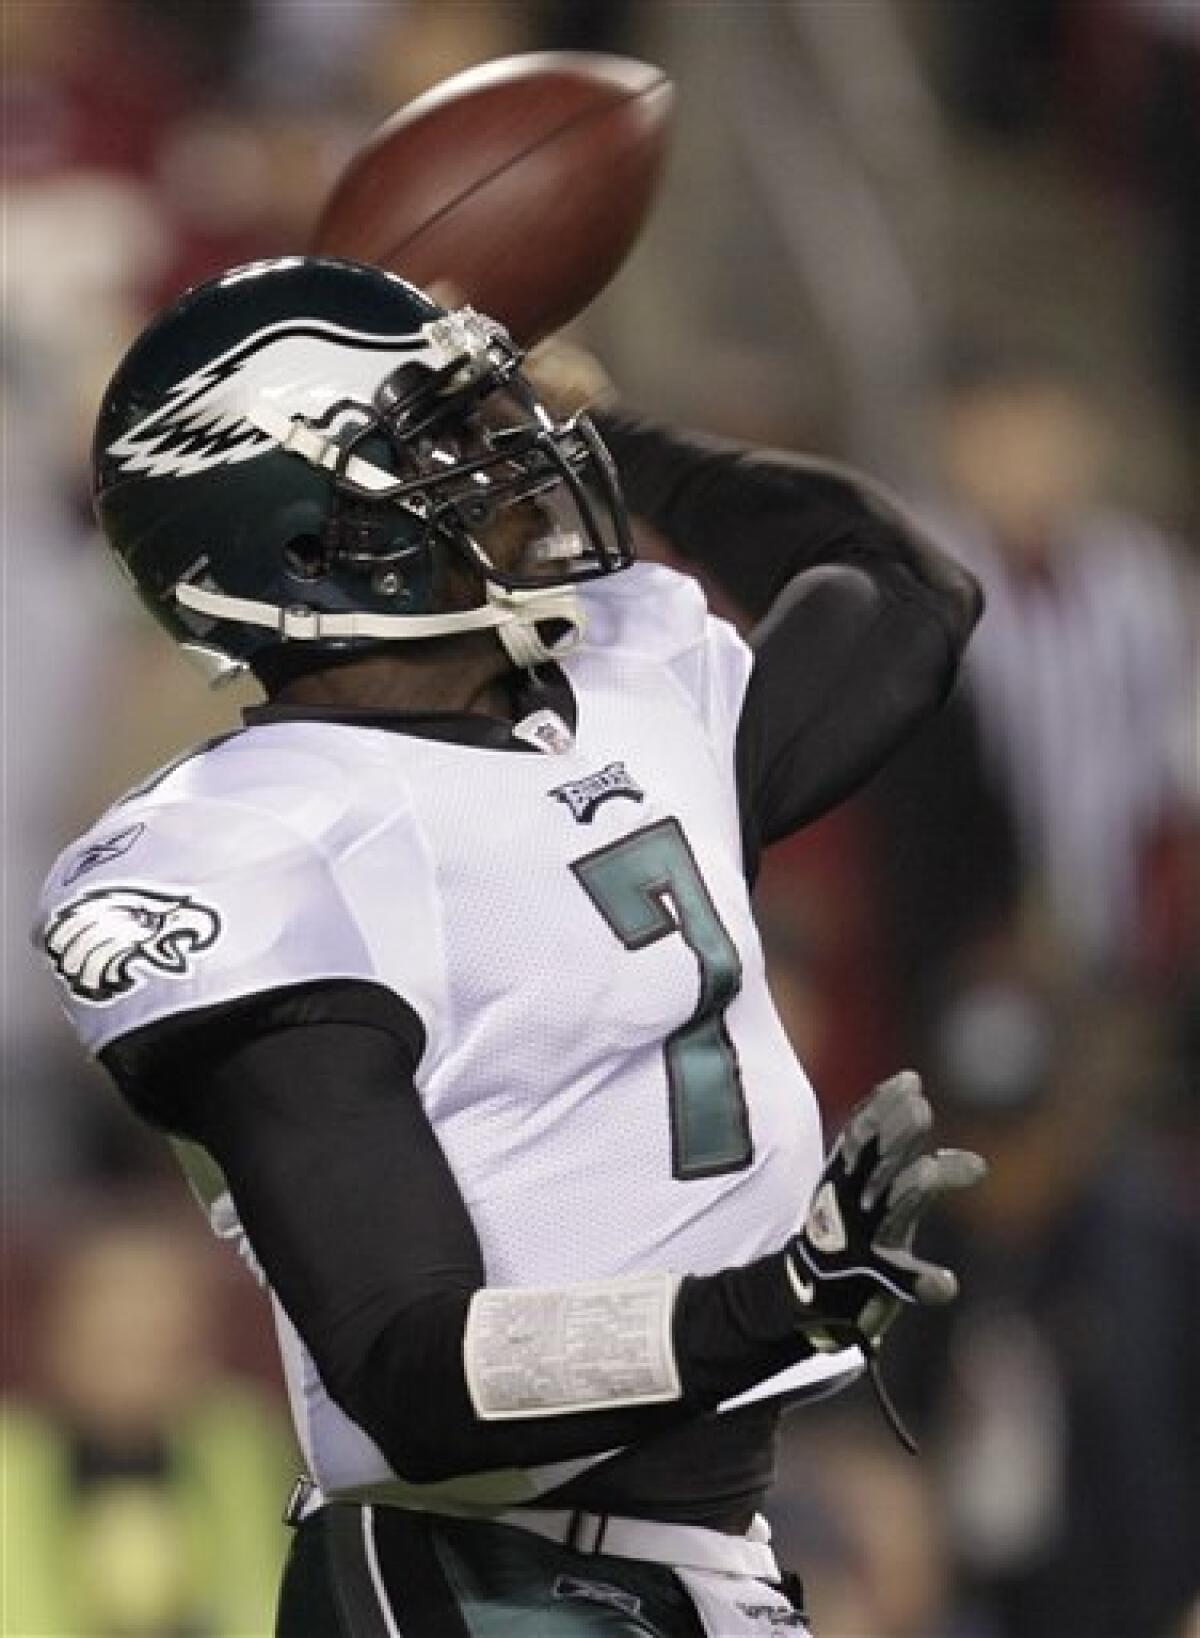 A few Super Bowl fans wear Michael Vick jerseys, all these years later